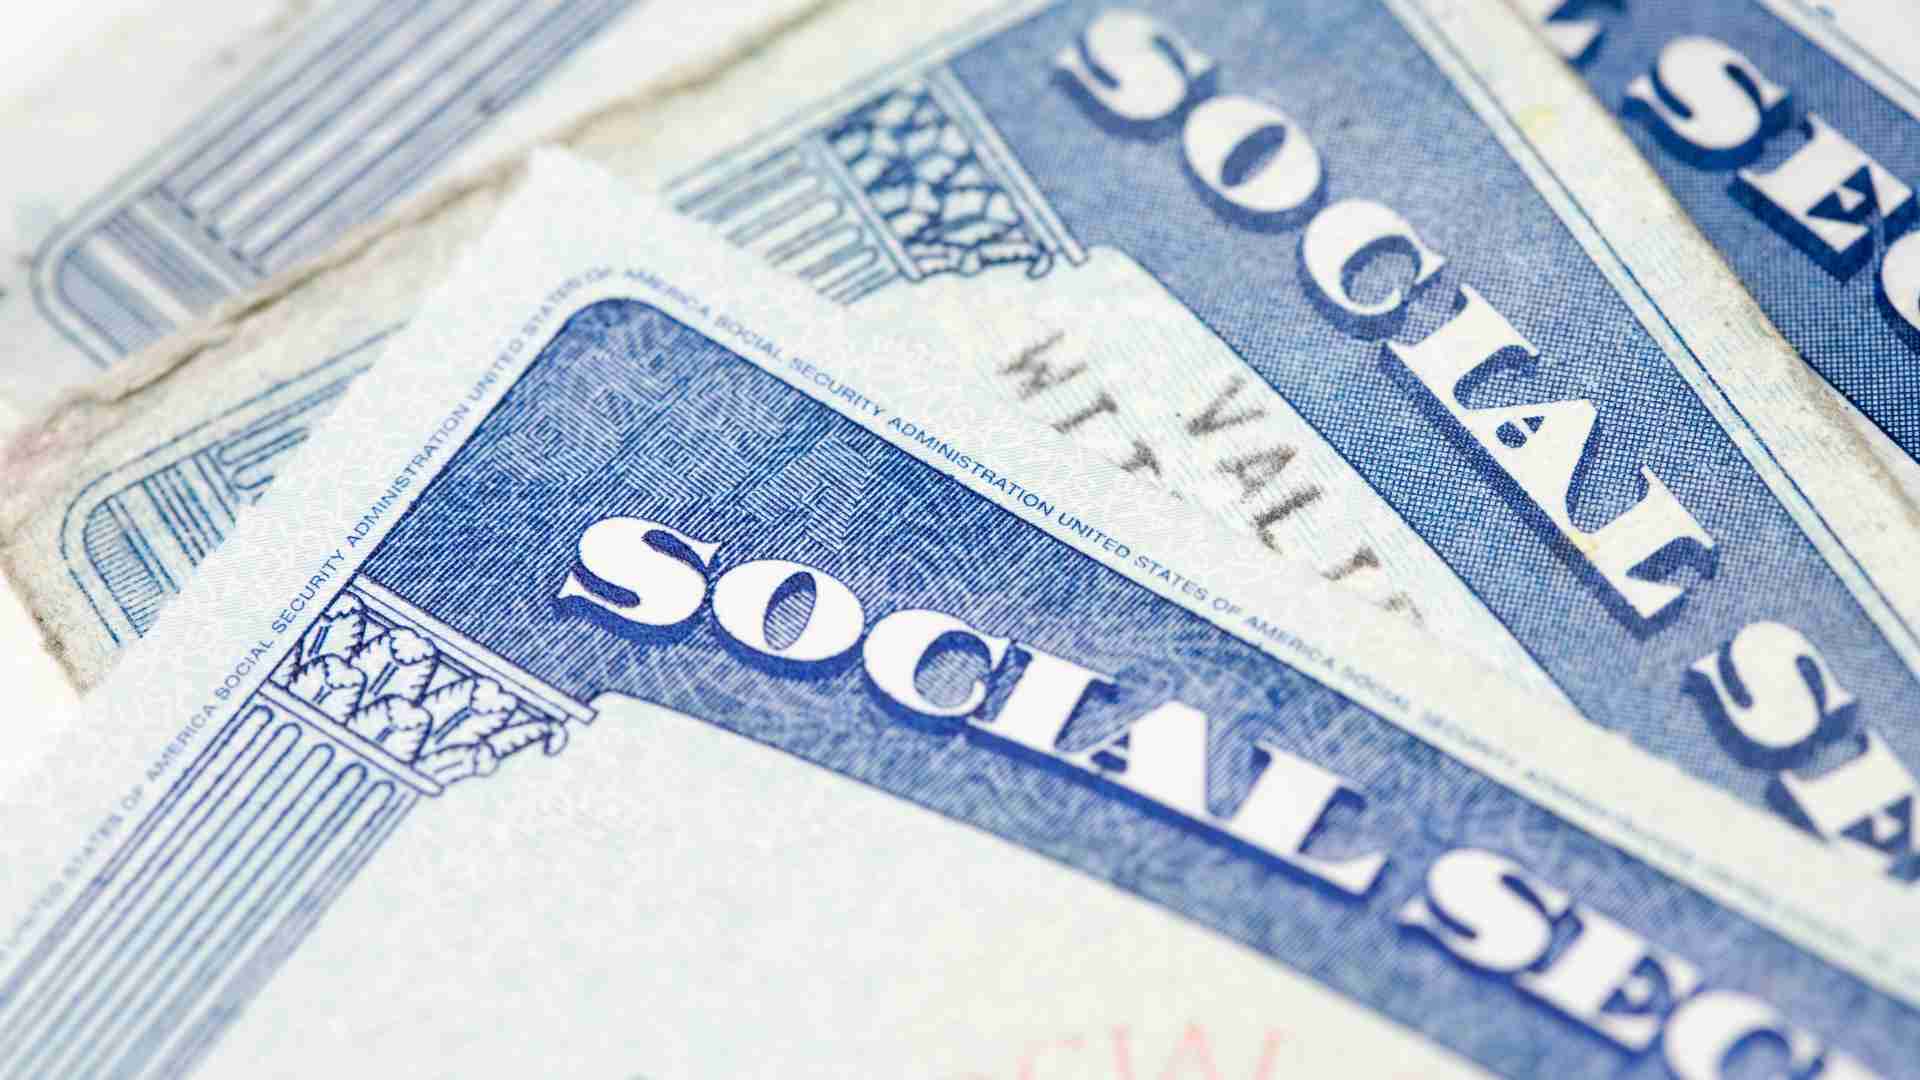 Those who do not qualify for the February 2 check will get their Social Security payment on a Wednesday